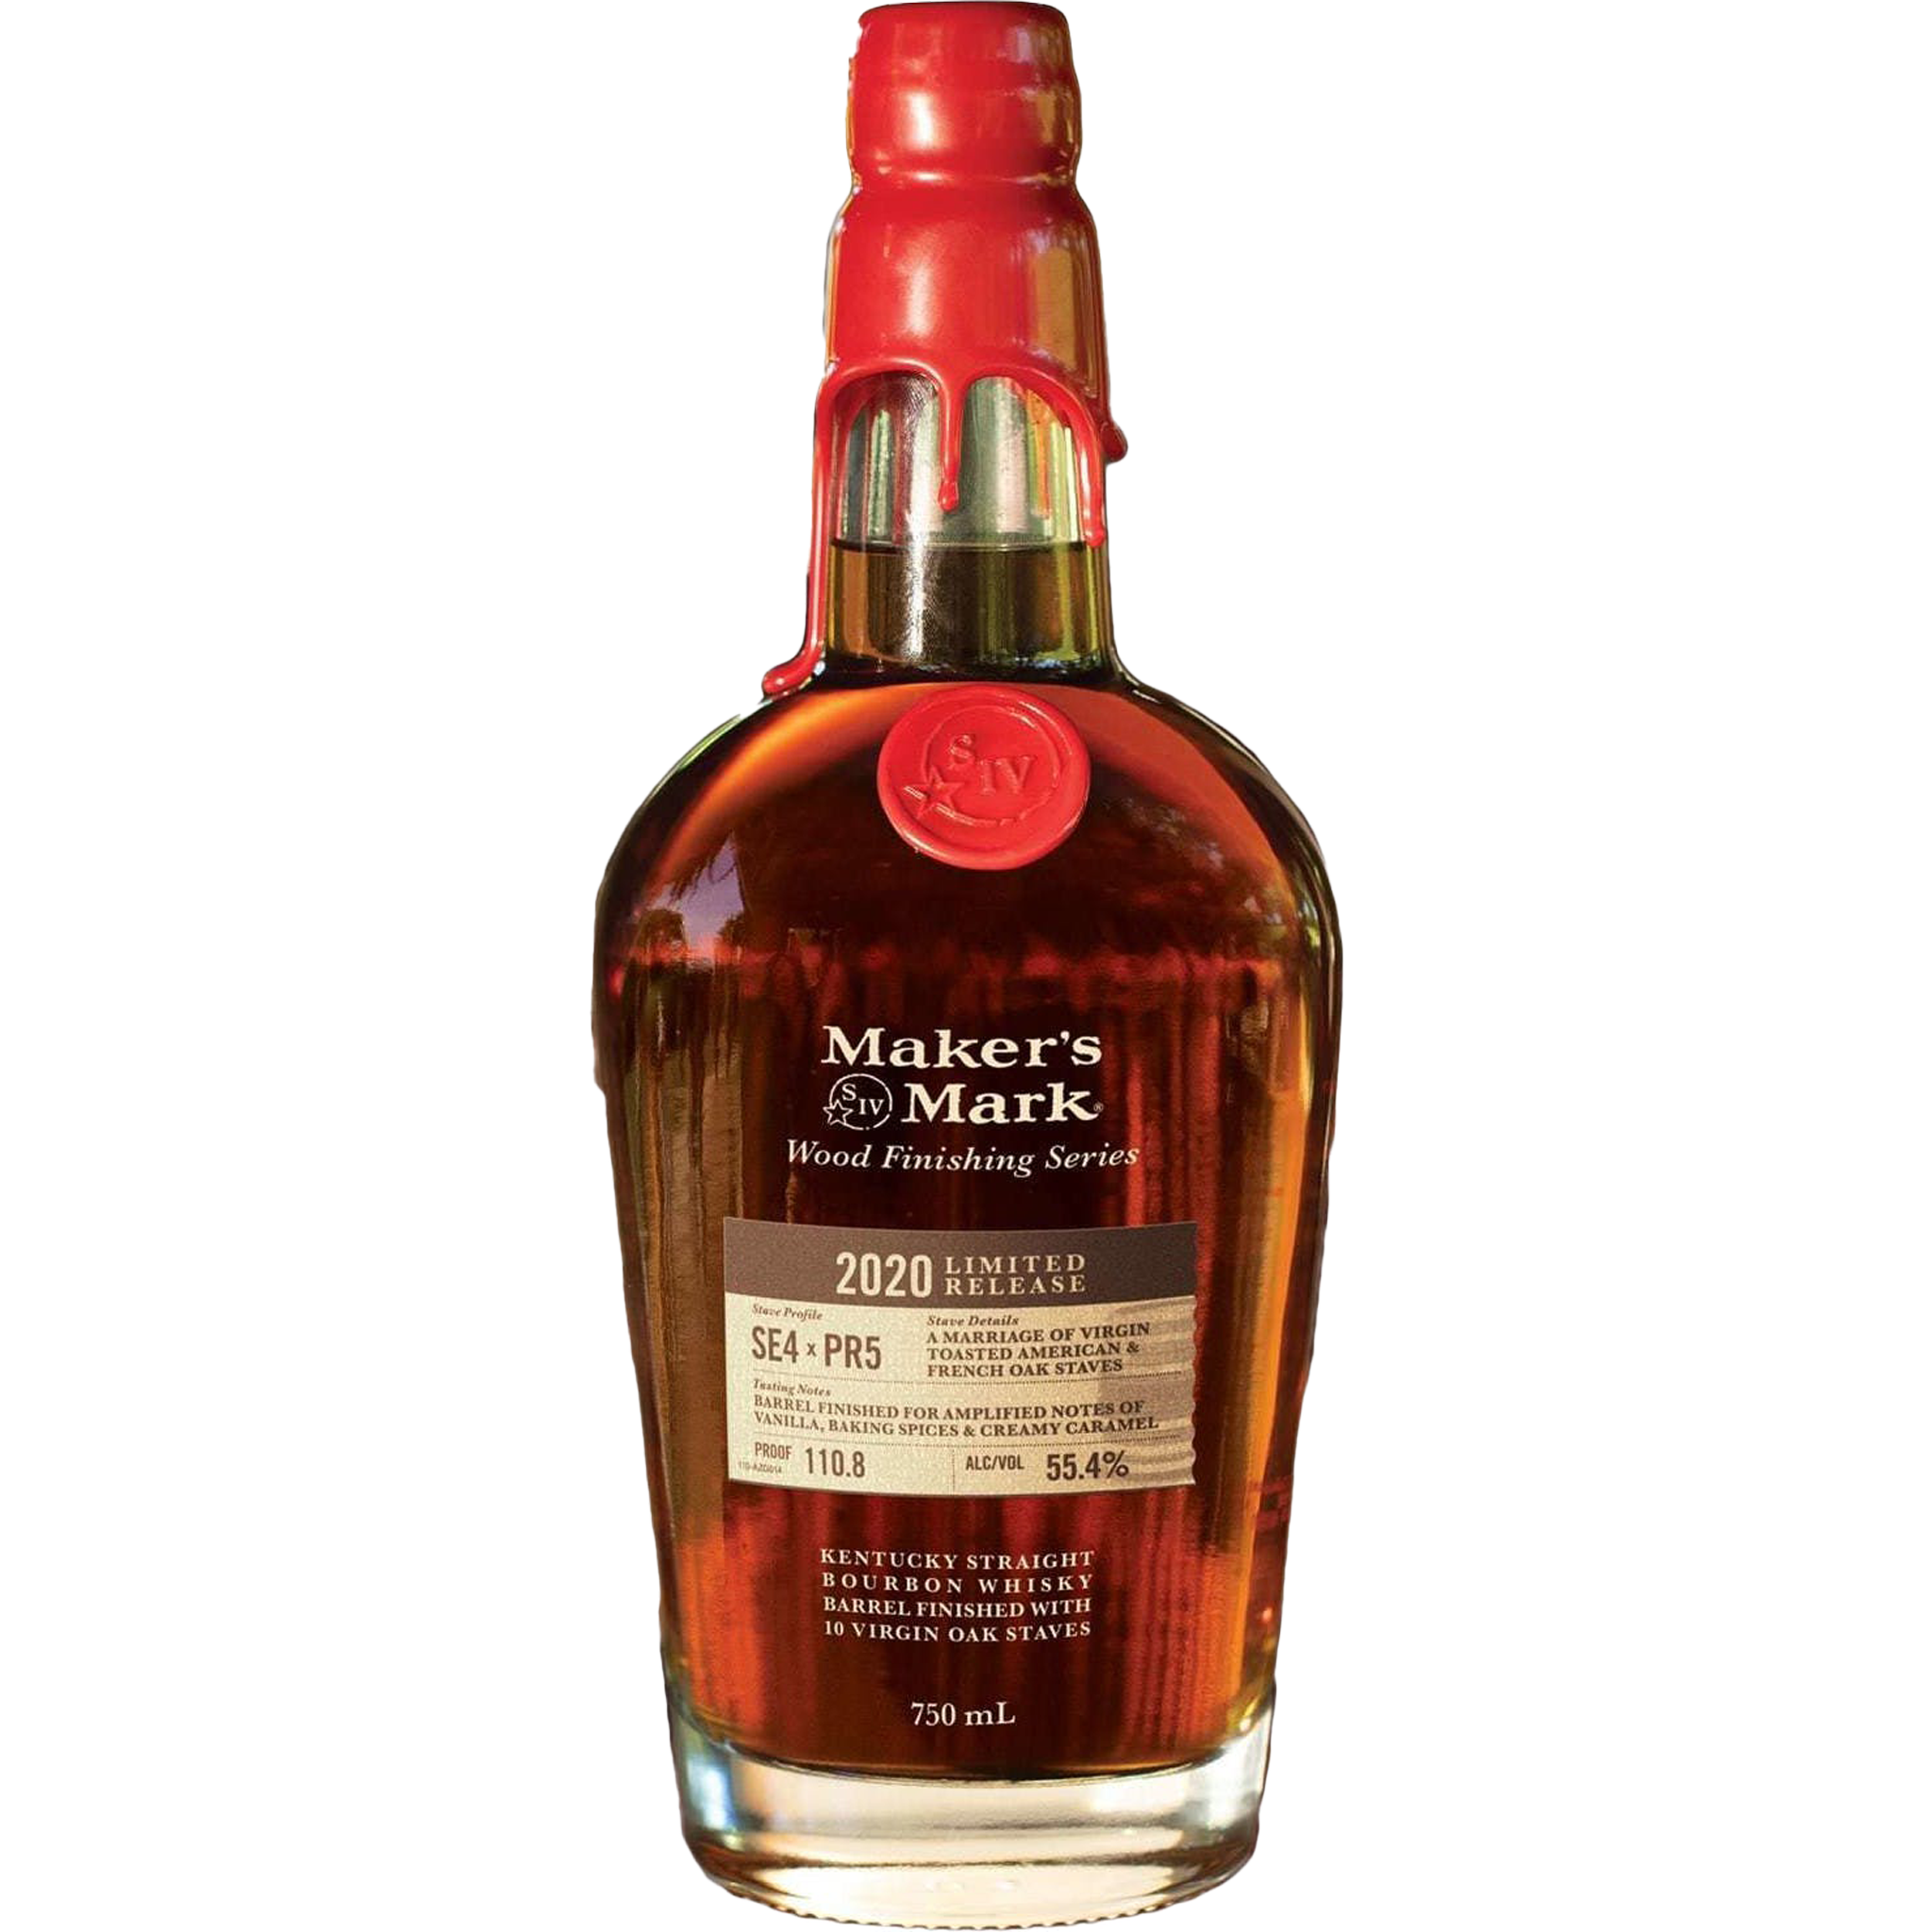 Maker's Mark Wood Finishing Series 2020 Limited Release